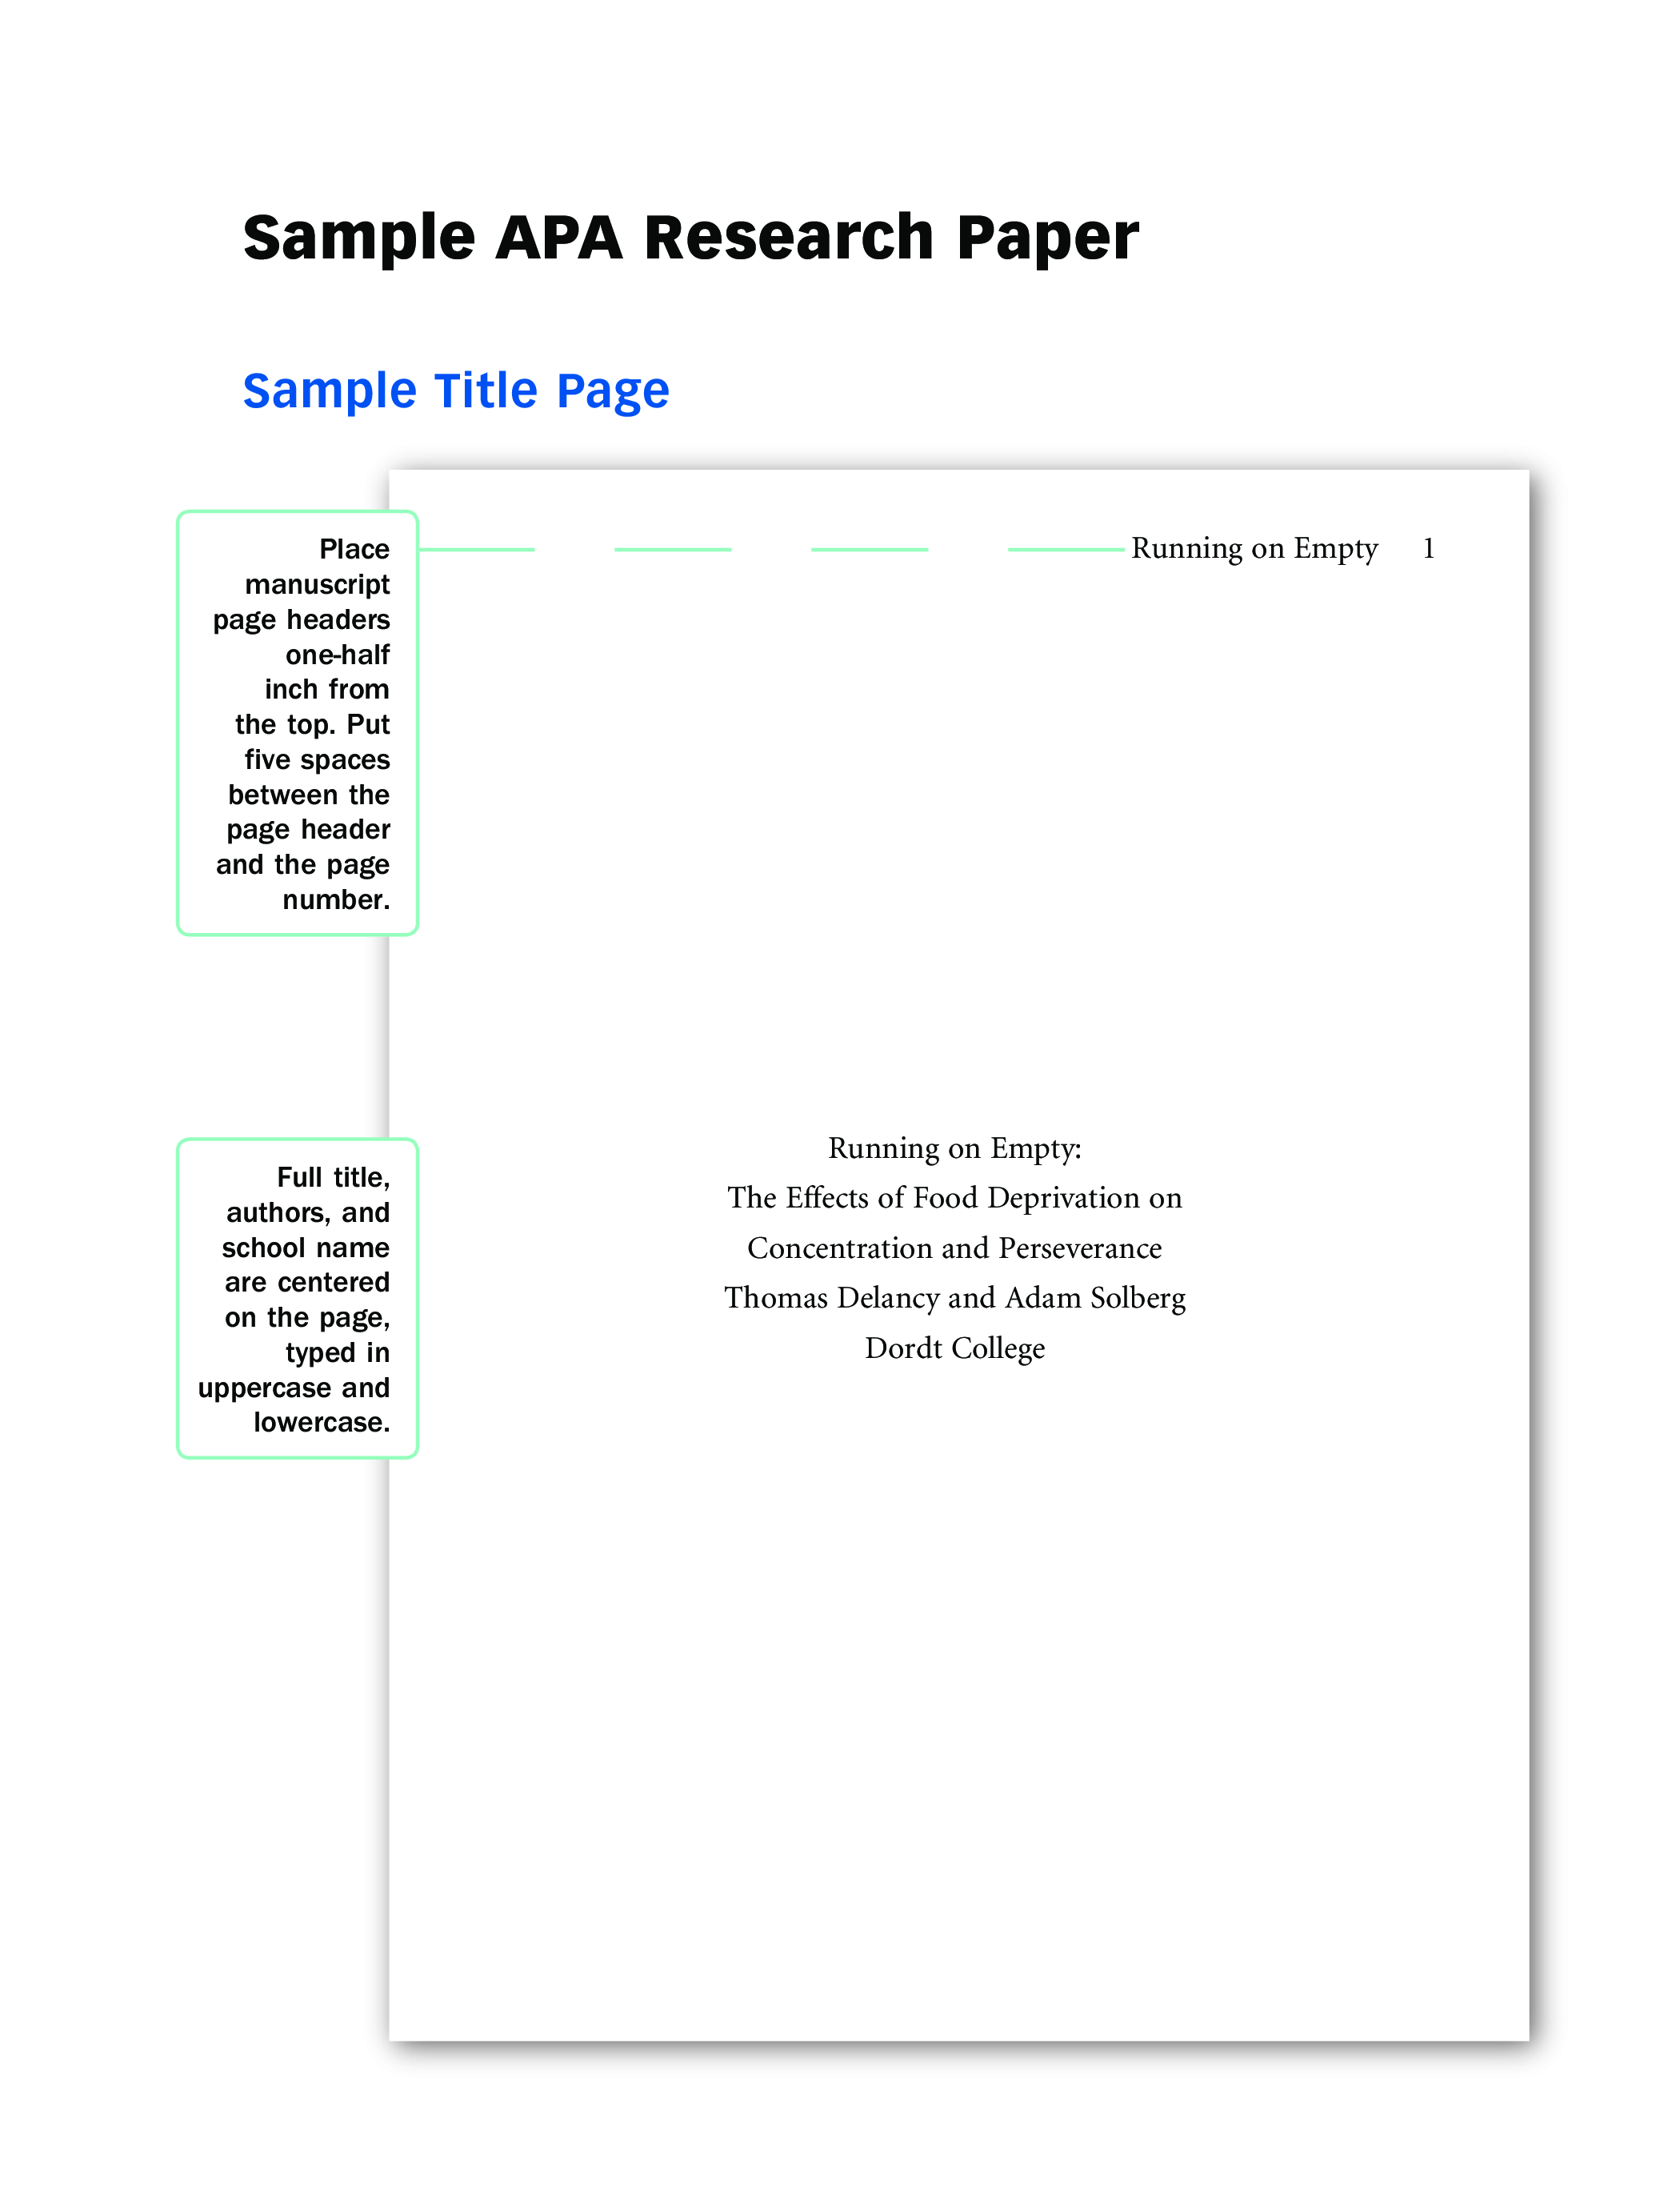 Research Paper template Templates at allbusinesstemplates com